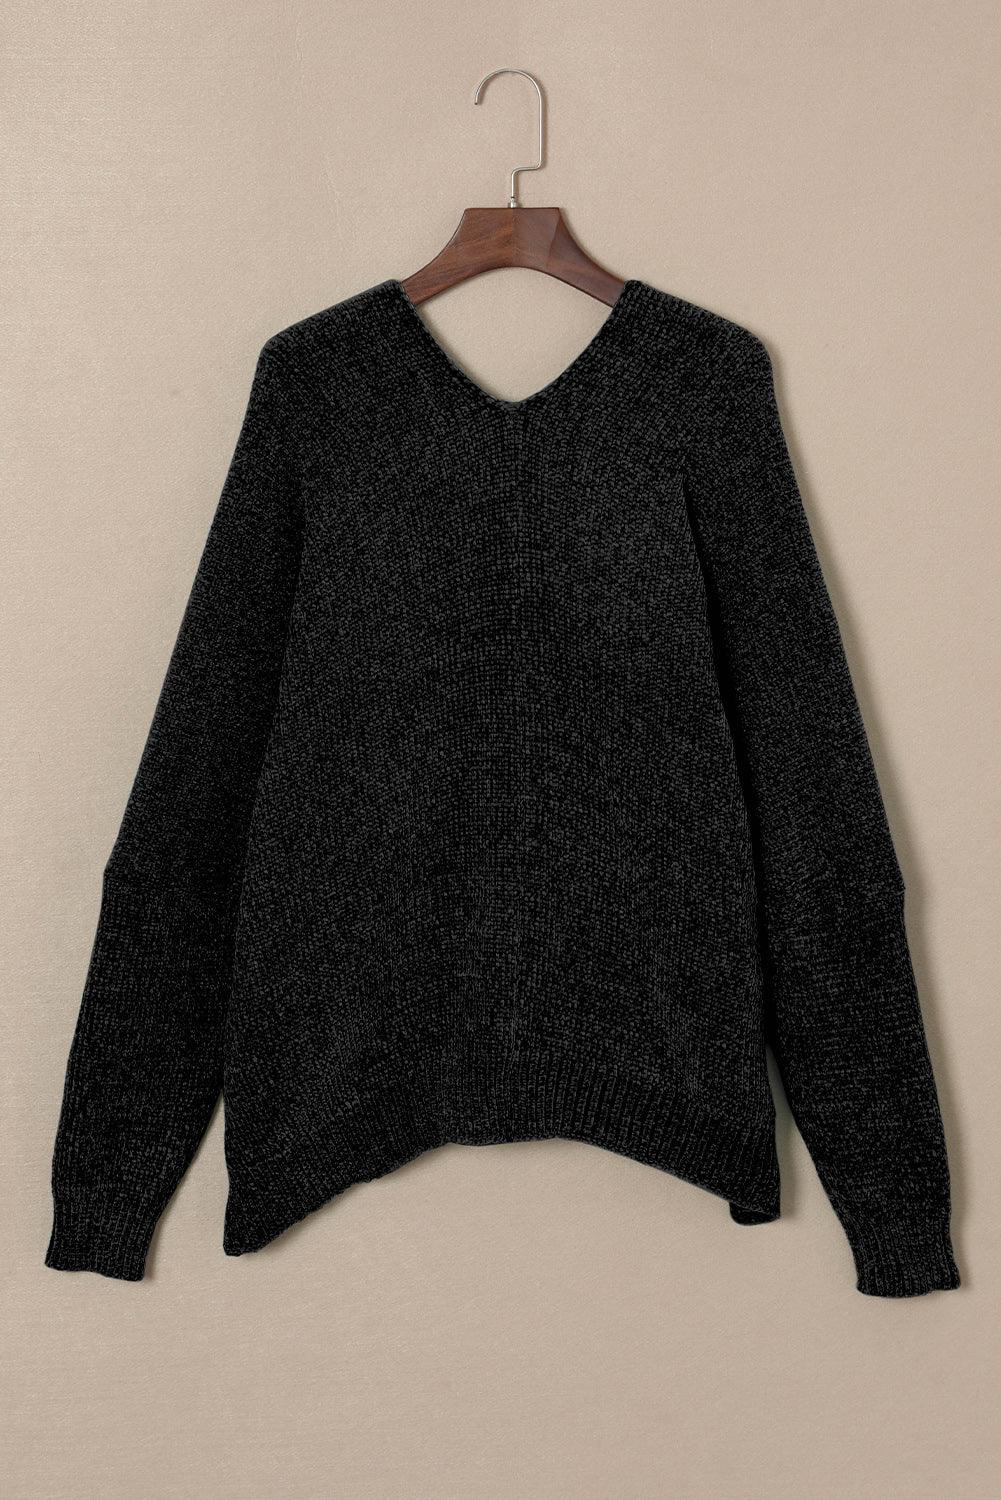 Gray Buttons Front Pocketed Sweater Cardigan - L & M Kee, LLC